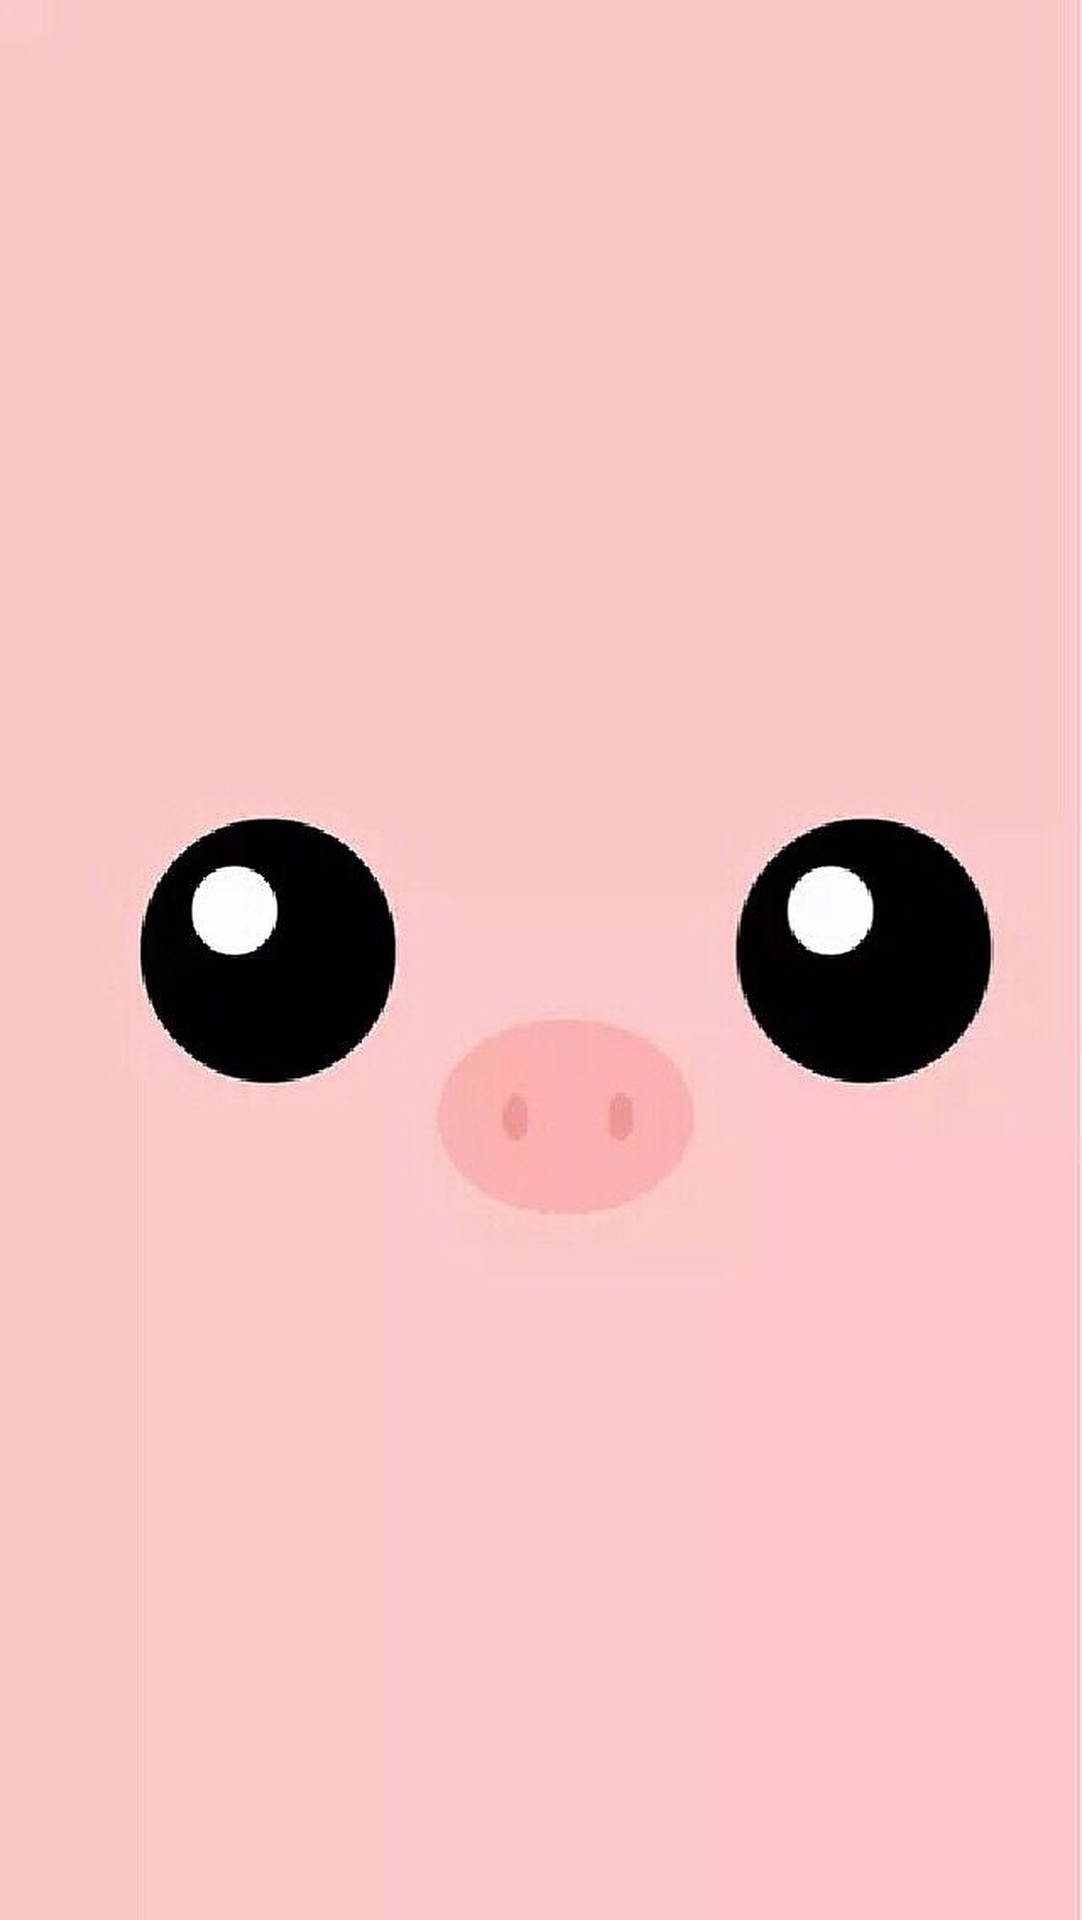 Cute Pig Eyes And Nose Wallpaper